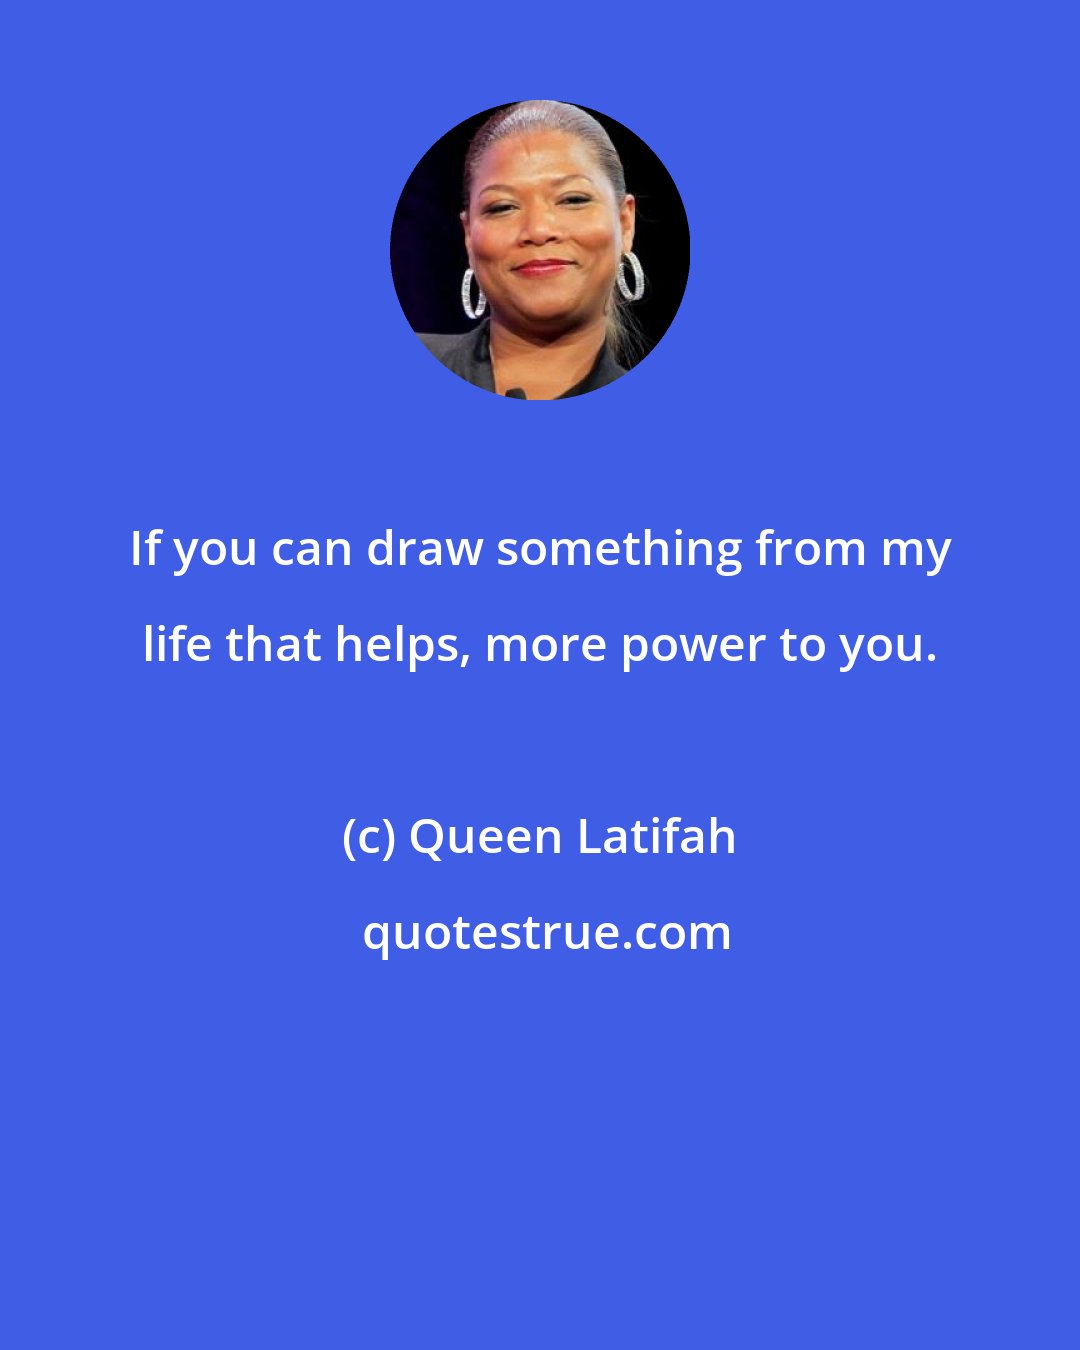 Queen Latifah: If you can draw something from my life that helps, more power to you.